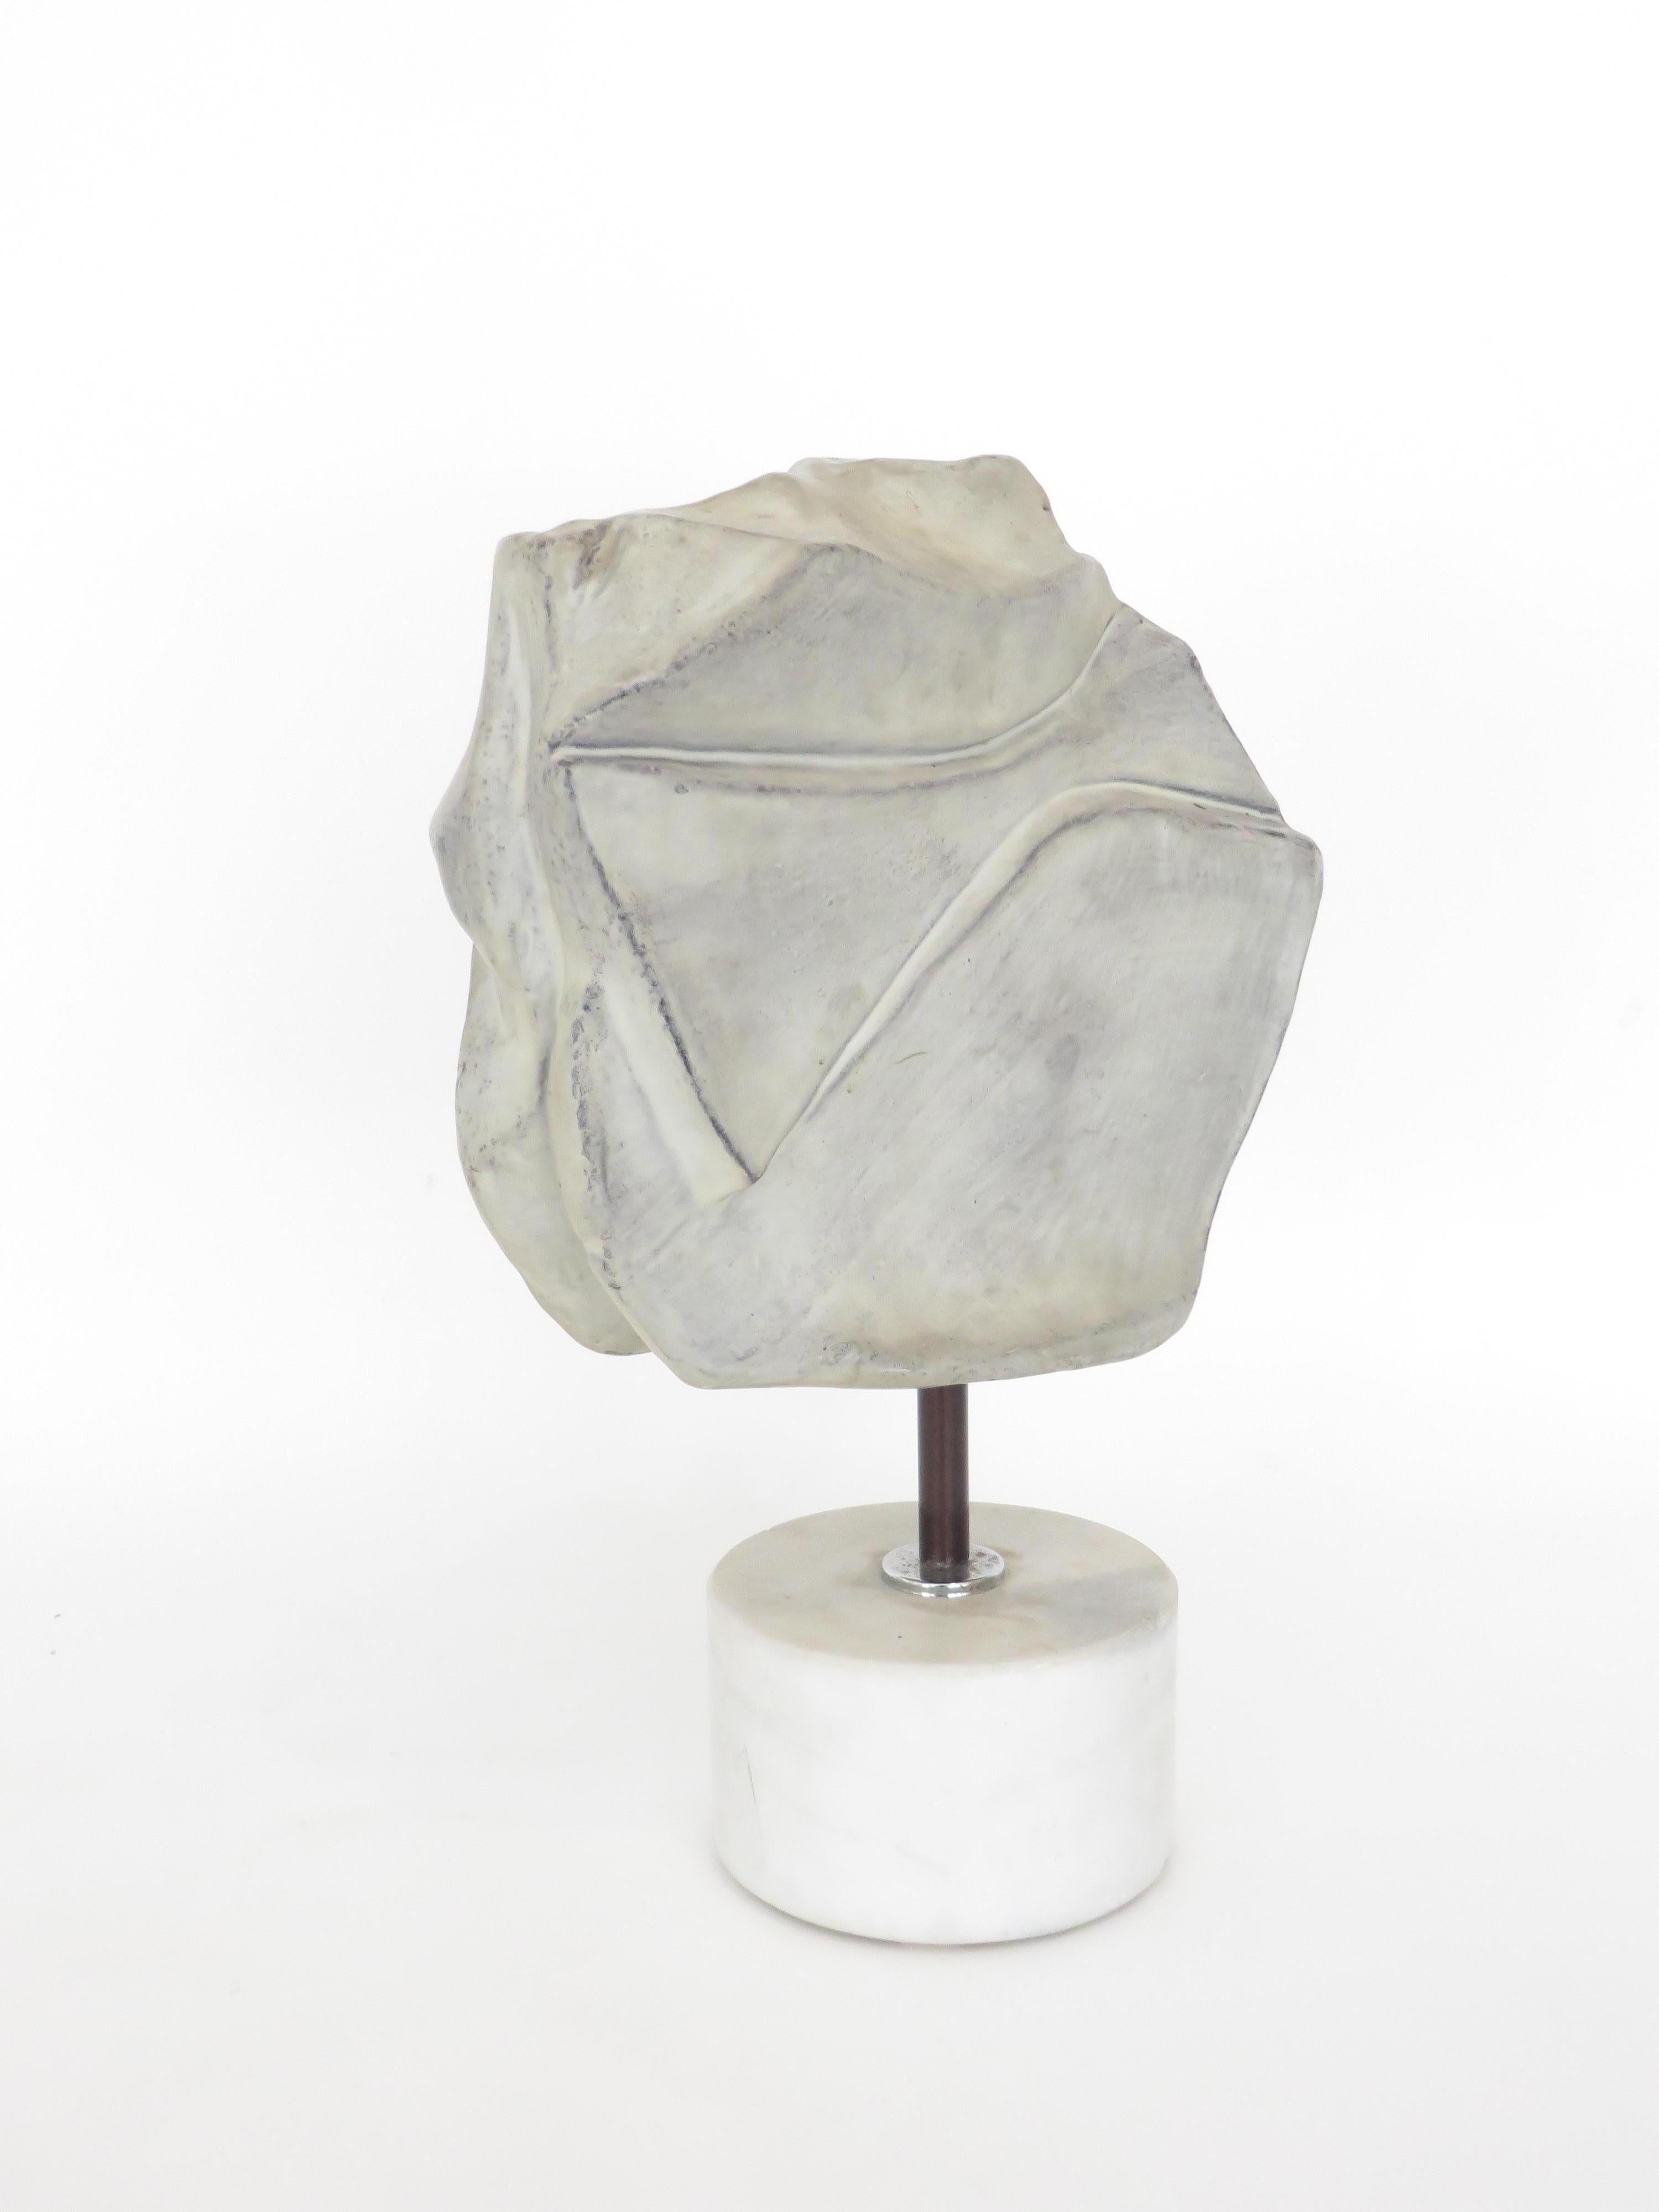 Signed large abstract ceramic studio sculpture by Italian artist Marcello Fantoni. 
An irregular shaped ceramic form with a white gray slightly tinged with blue glaze which Fantoni often used on his studio sculptures.
Signed Fantoni 1974. The